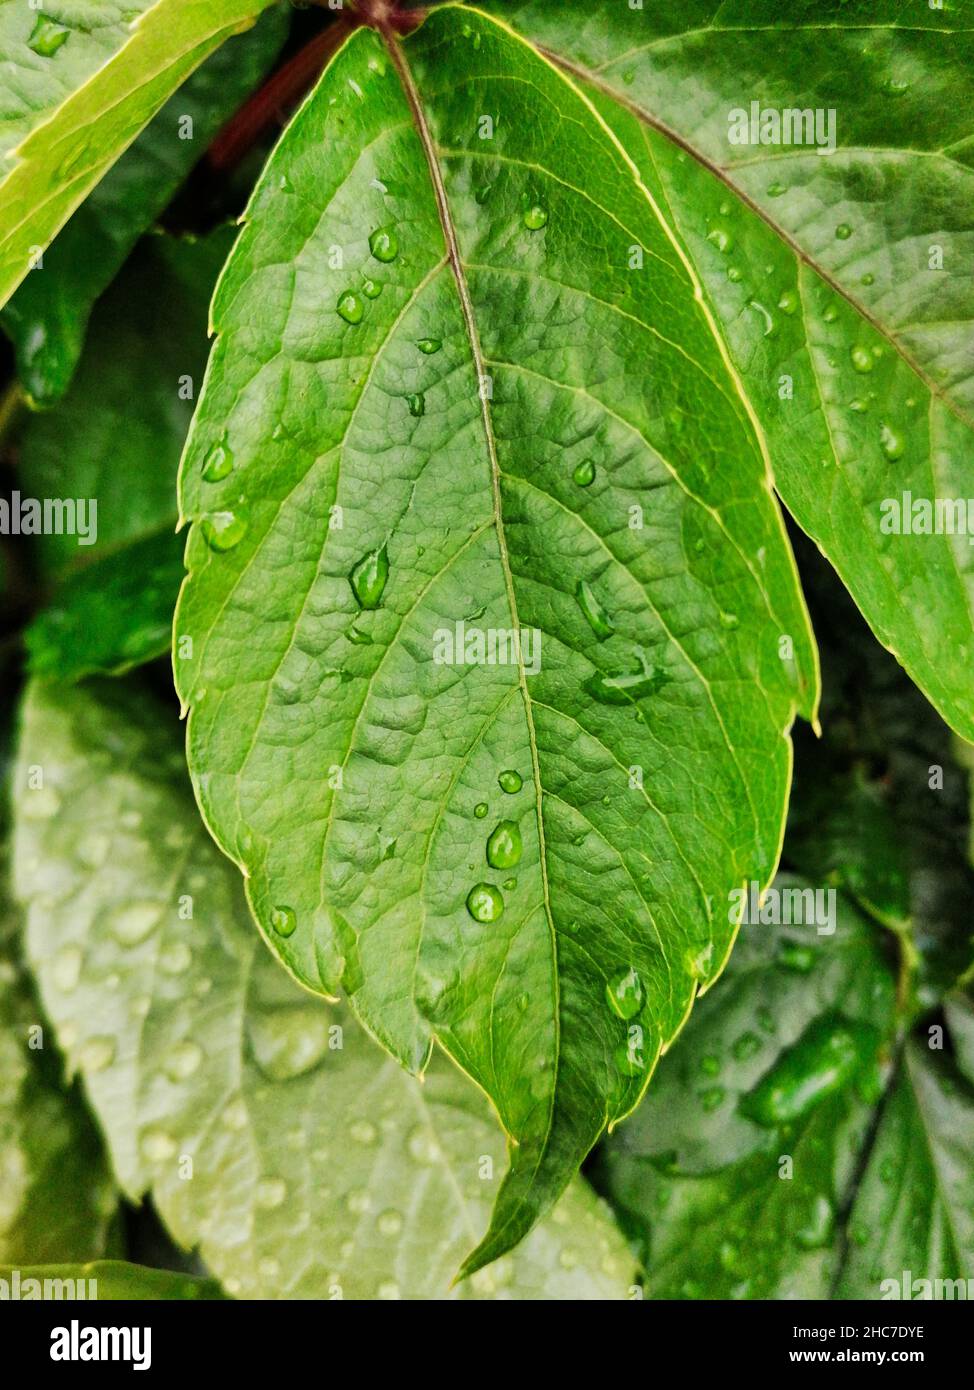 Closeup of water droplets on the green foliage Stock Photo